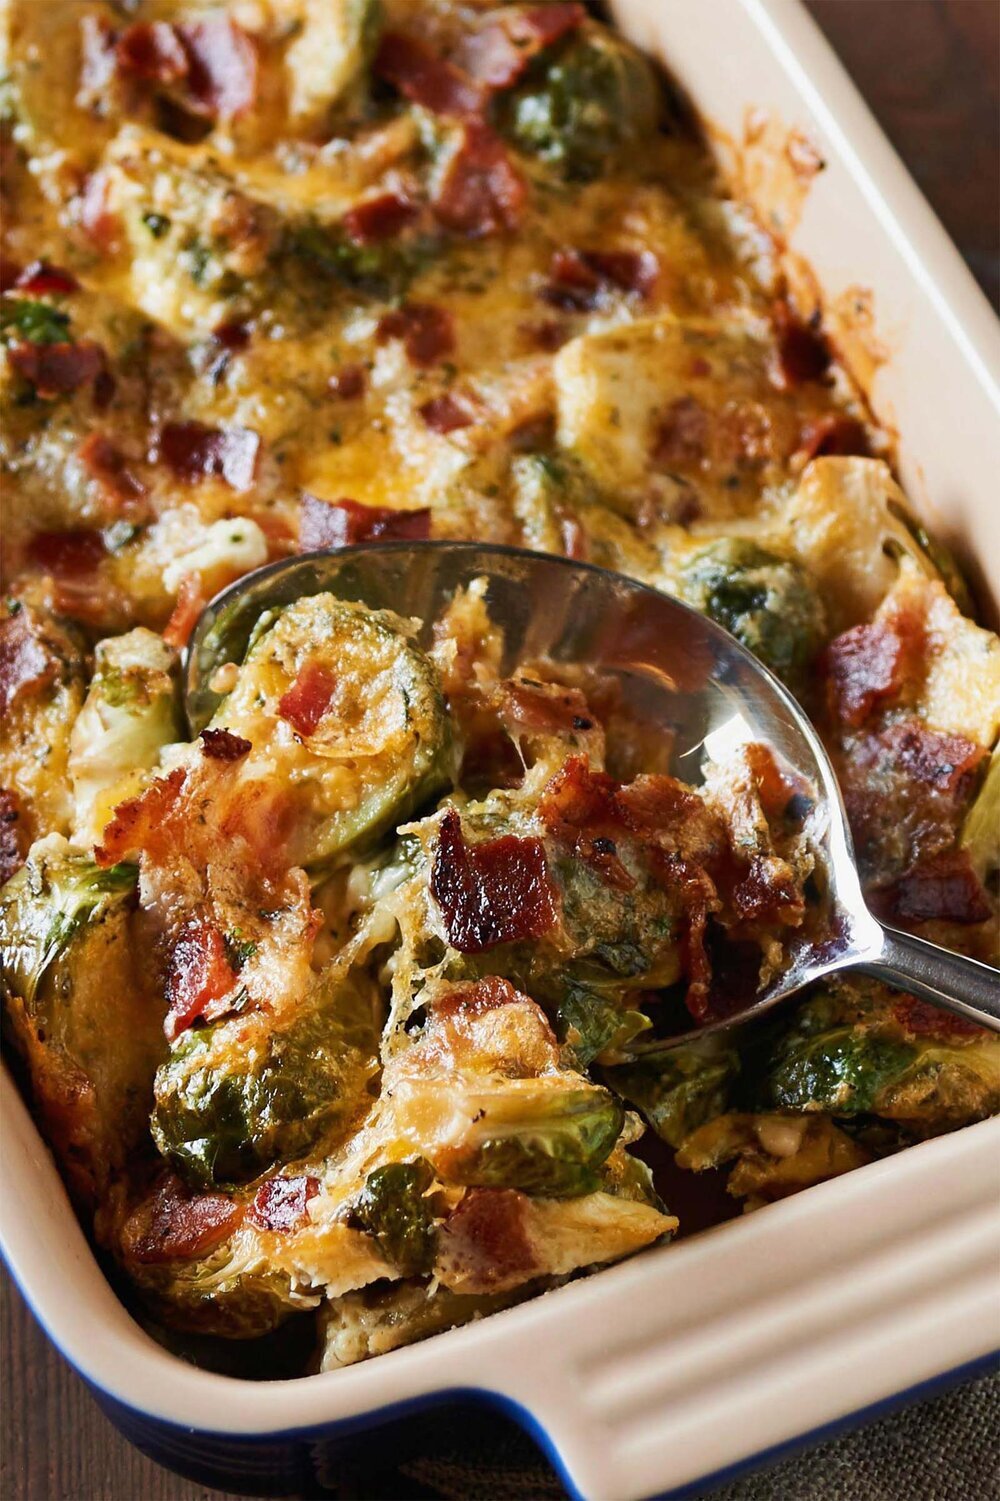 Mangia-Sta'zitto-Brussels-Sprouts-Gratin-Bacon.jpg